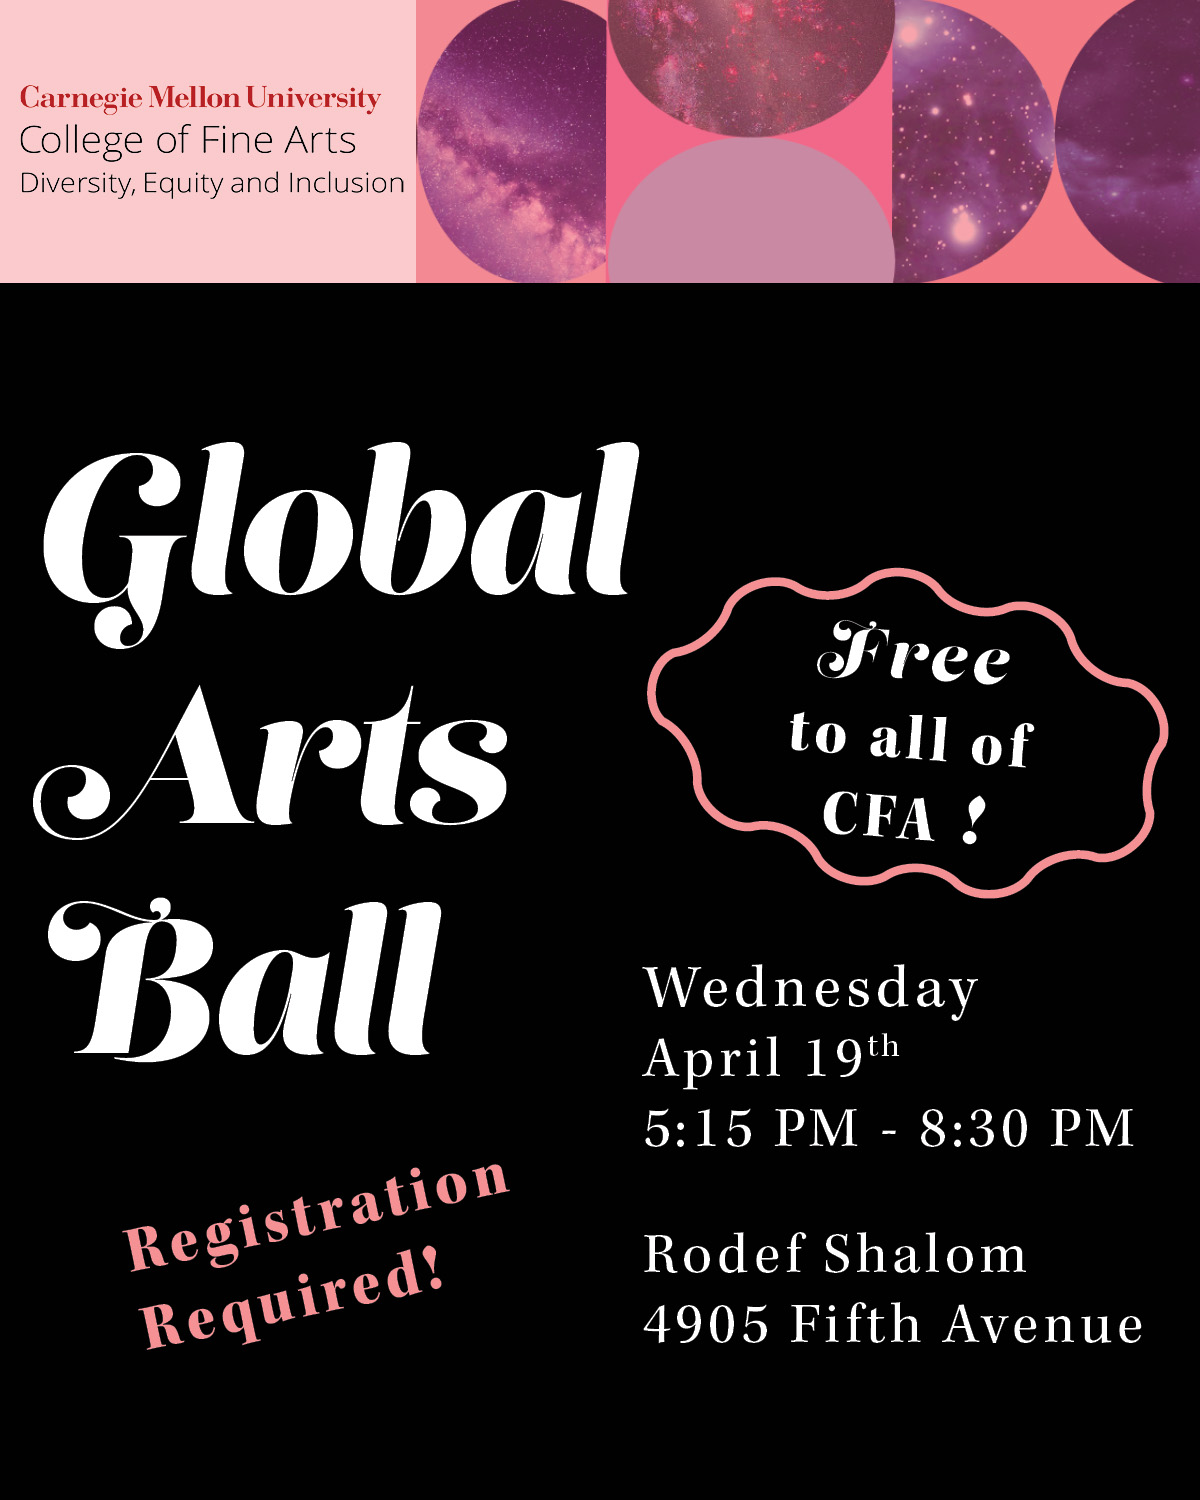 CMU CFA DEI Global Arts Ball. Free to all CFA! Registration Required! Wednesday, April 19th, 5:15pm–8:30pm. Rodef Shalom, 4905 Fifth Ave.